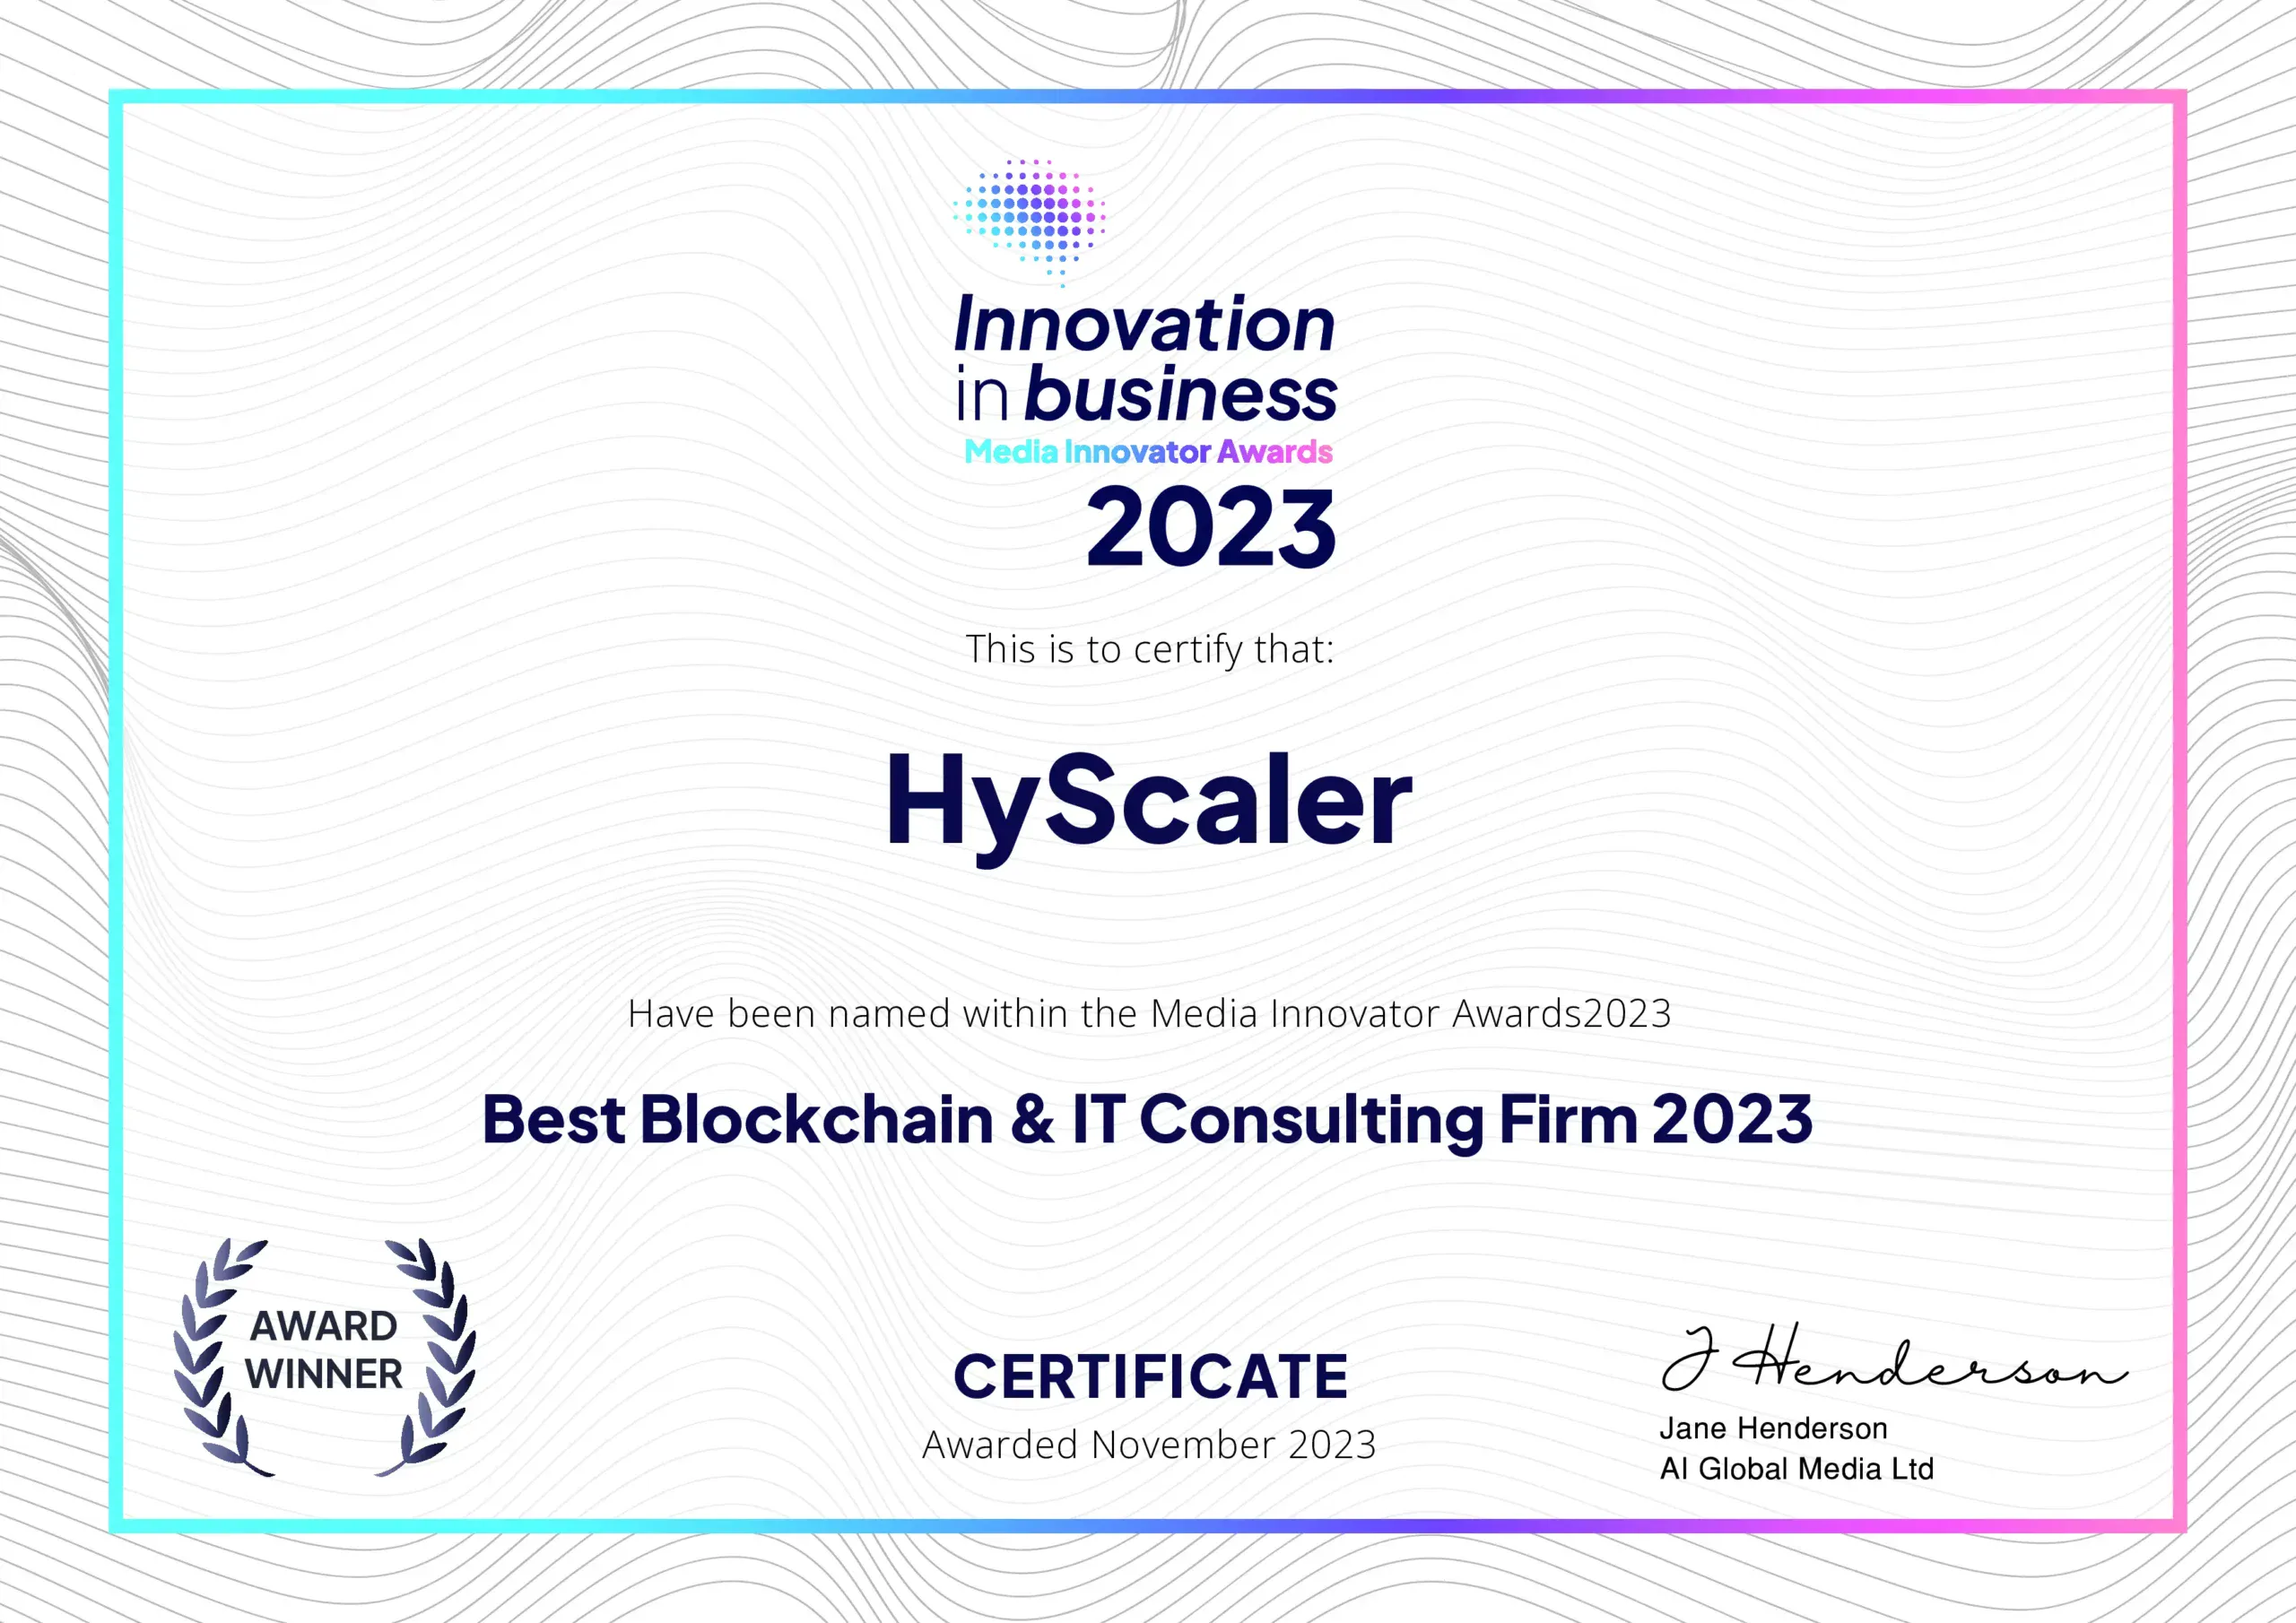 Best Blockchain & IT Consulting Firm 2023